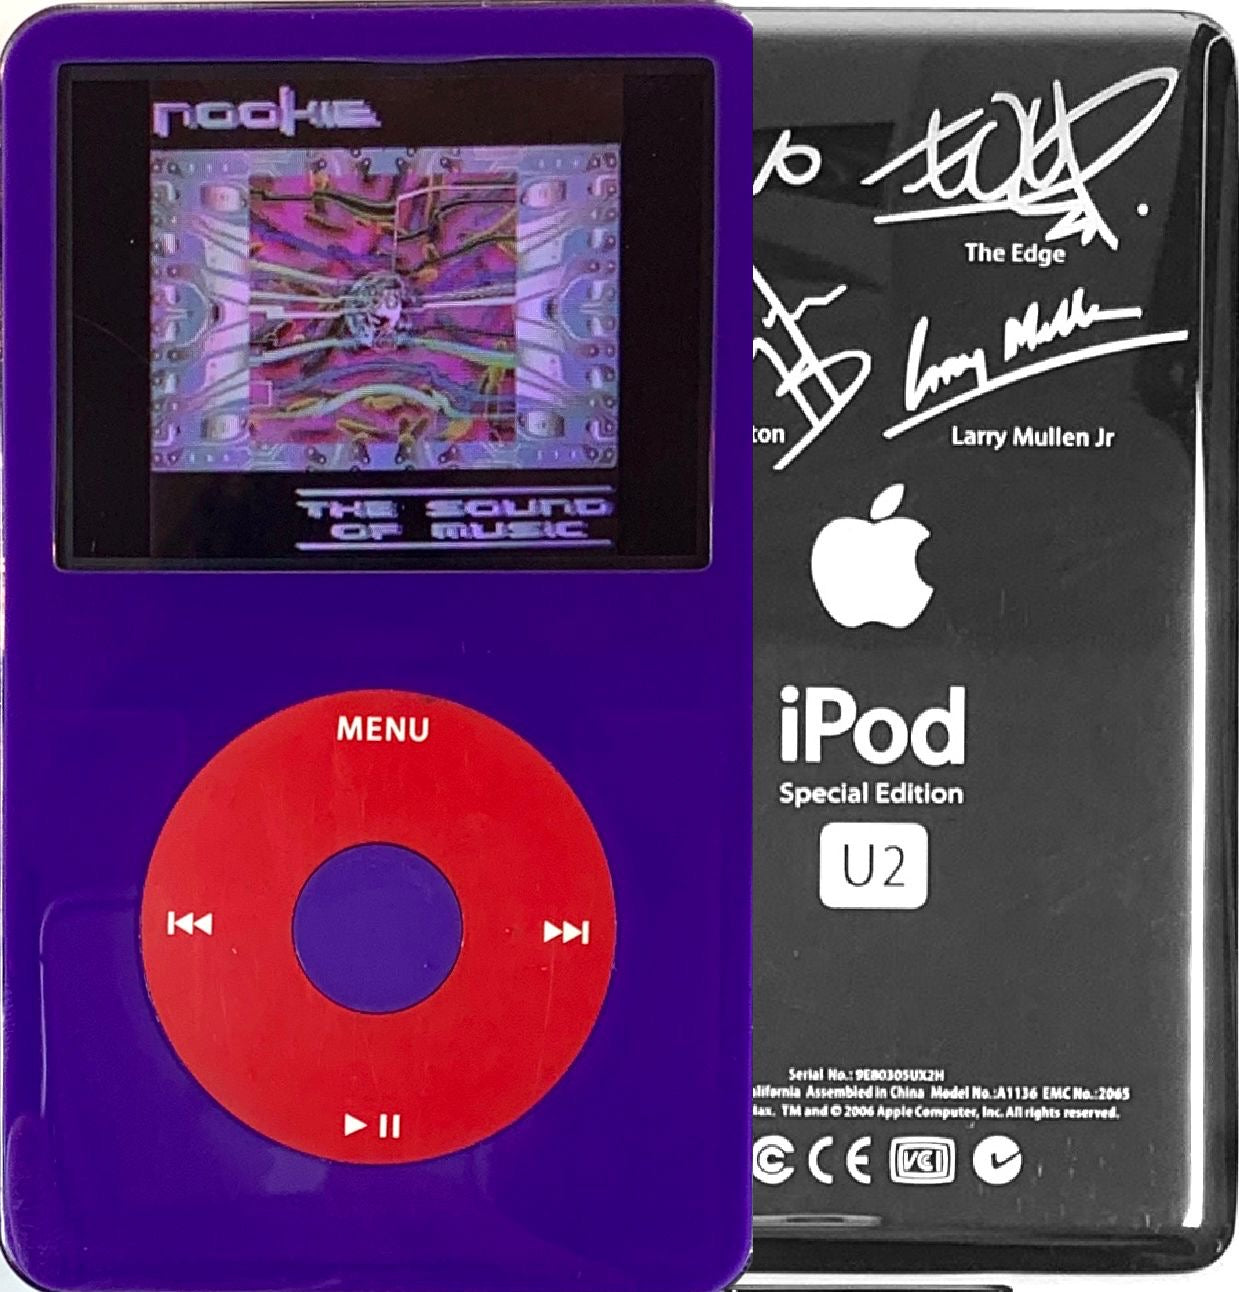 New Apple iPod Video Classic 5th & 5.5 Enhanced Purple / Red / Purple (U2 Special Edition Silver)